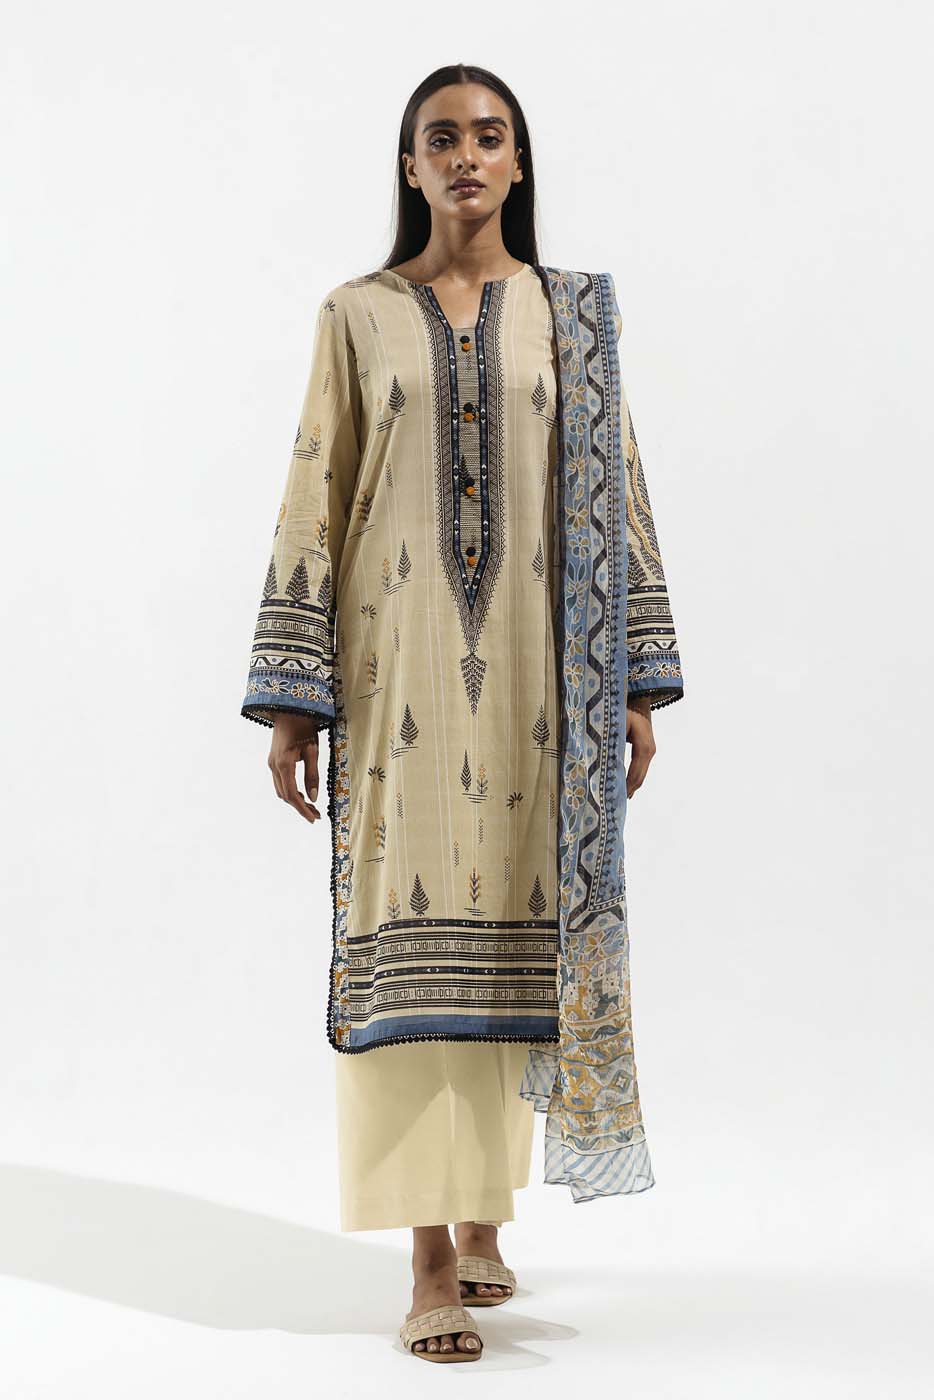 2 PIECE - PRINTED LAWN SUIT - ETHNIC CHARM (UNSTITCHED) - BEECHTREE